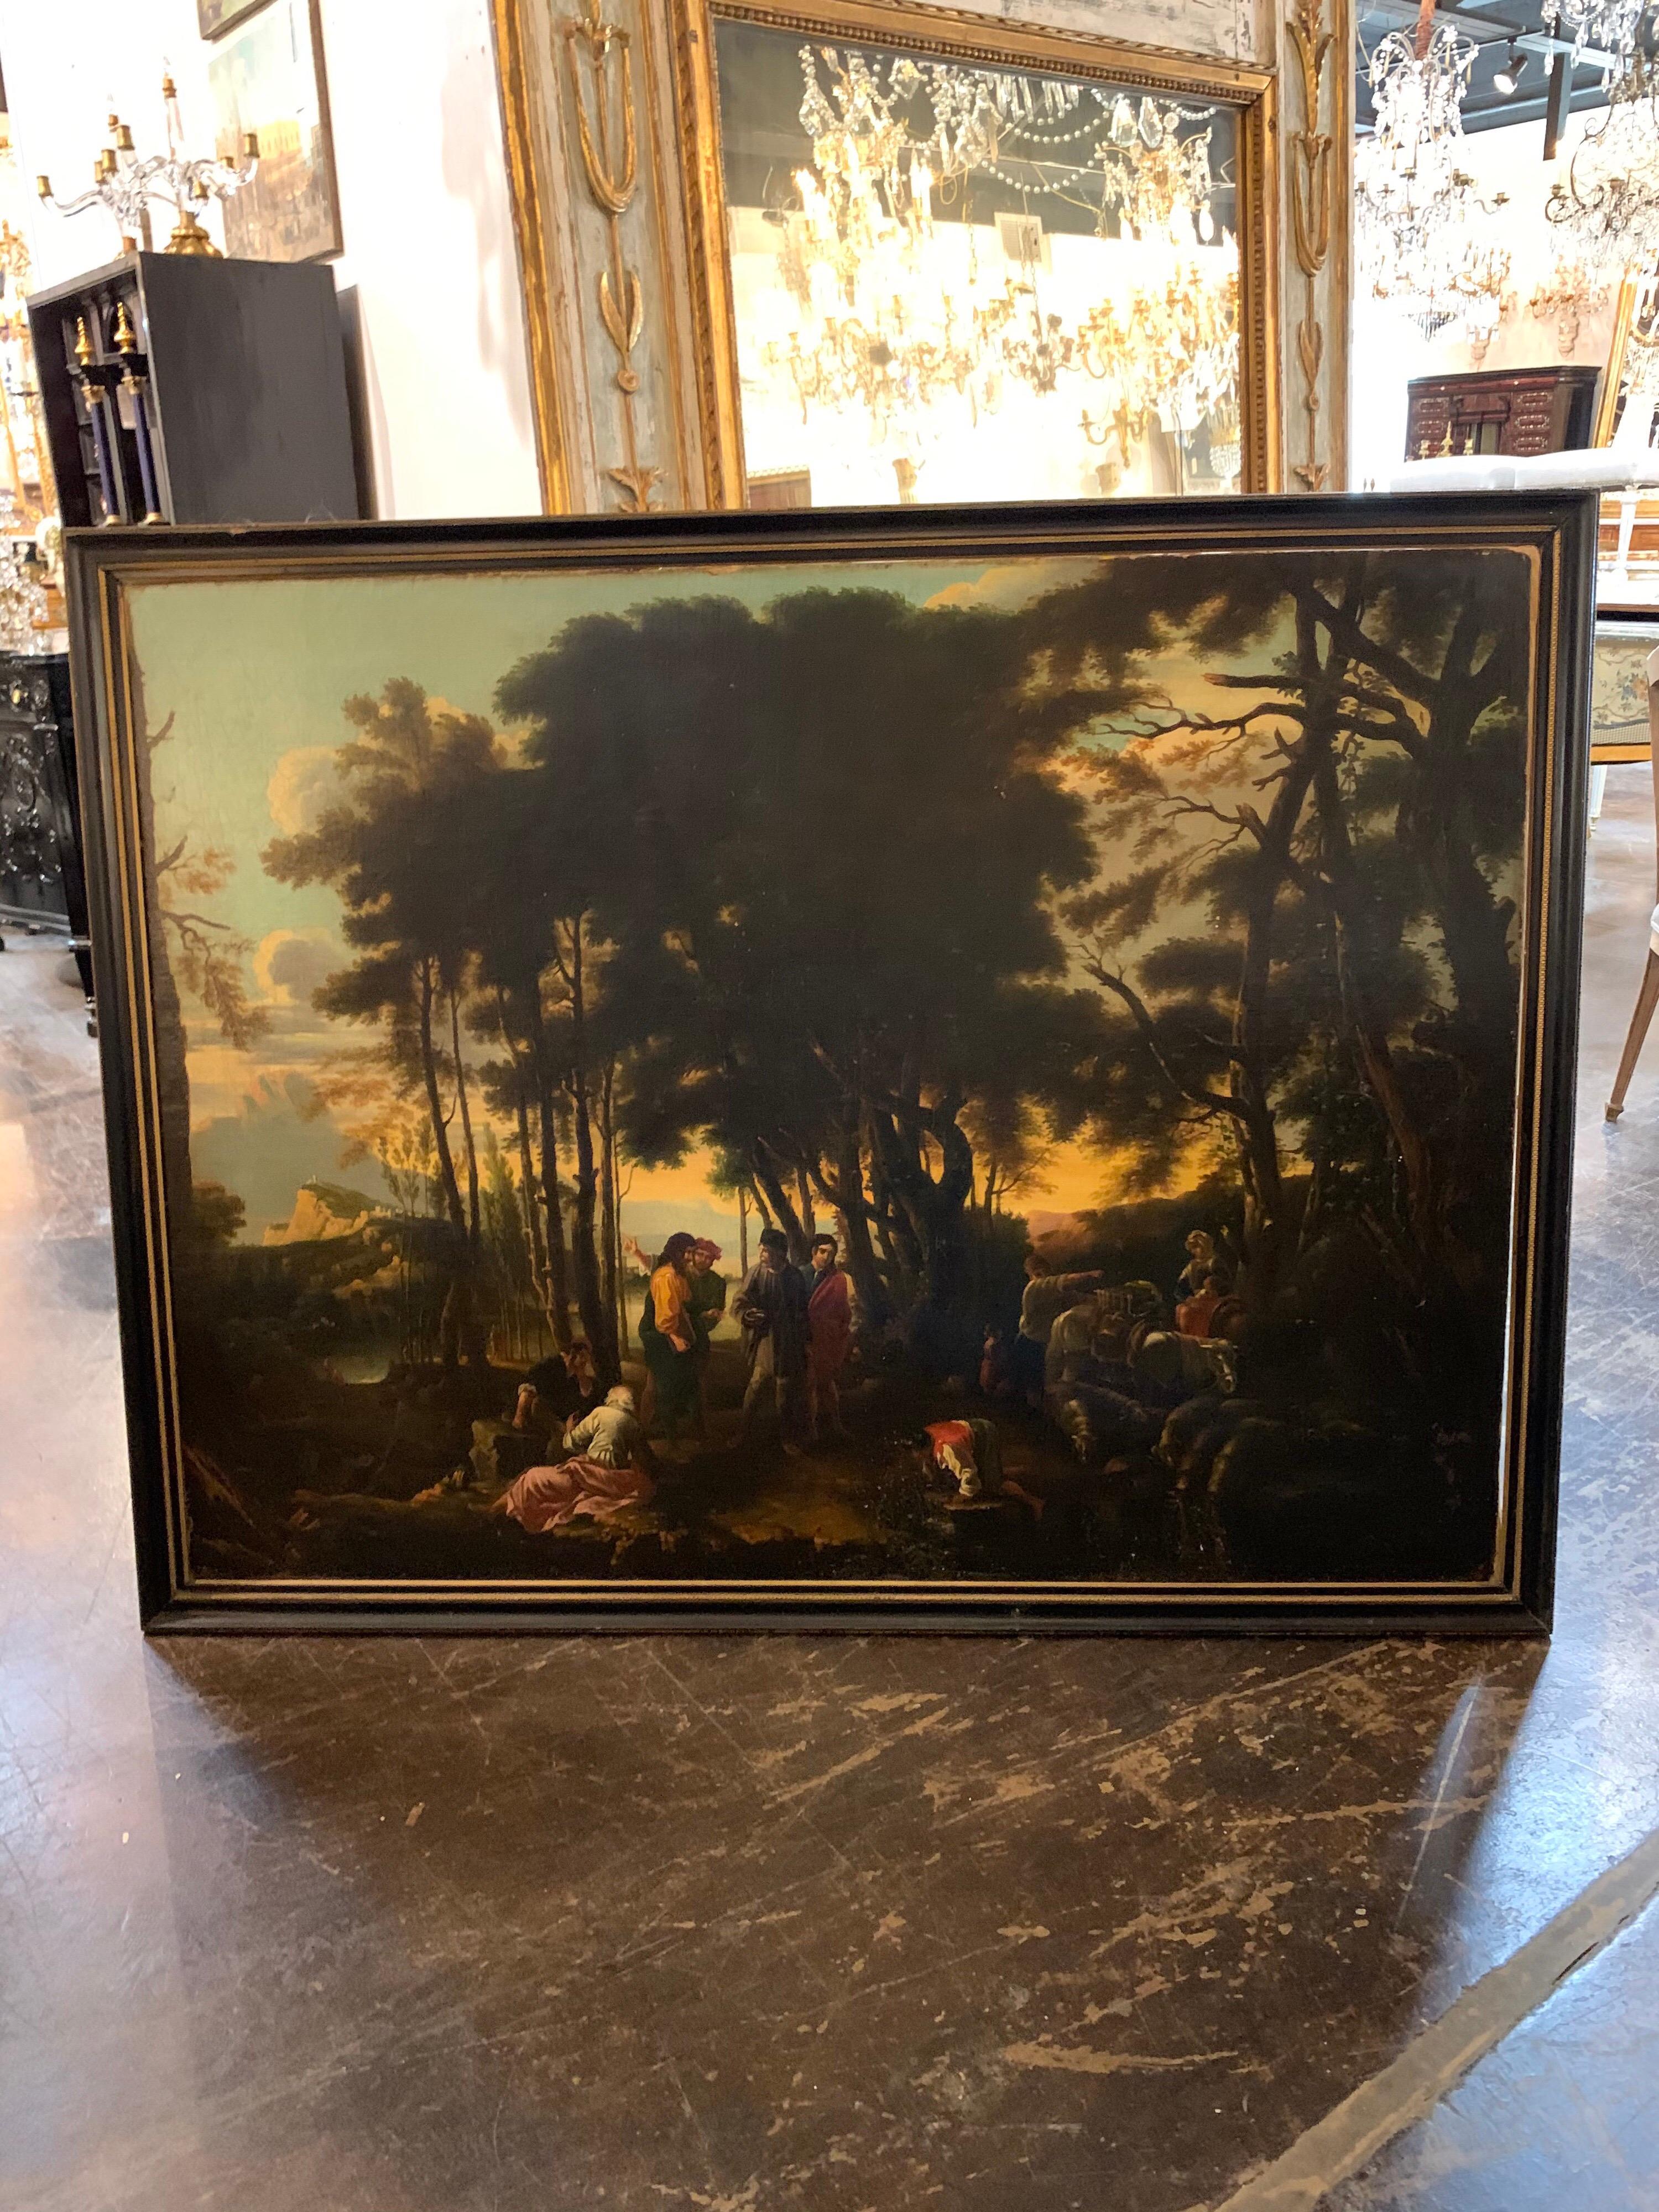 Beautiful 18th century Italian old masters oil painting. The scene depicts a rural landscape with a group of people in conversation and various tasks along with animals. An interesting piece!